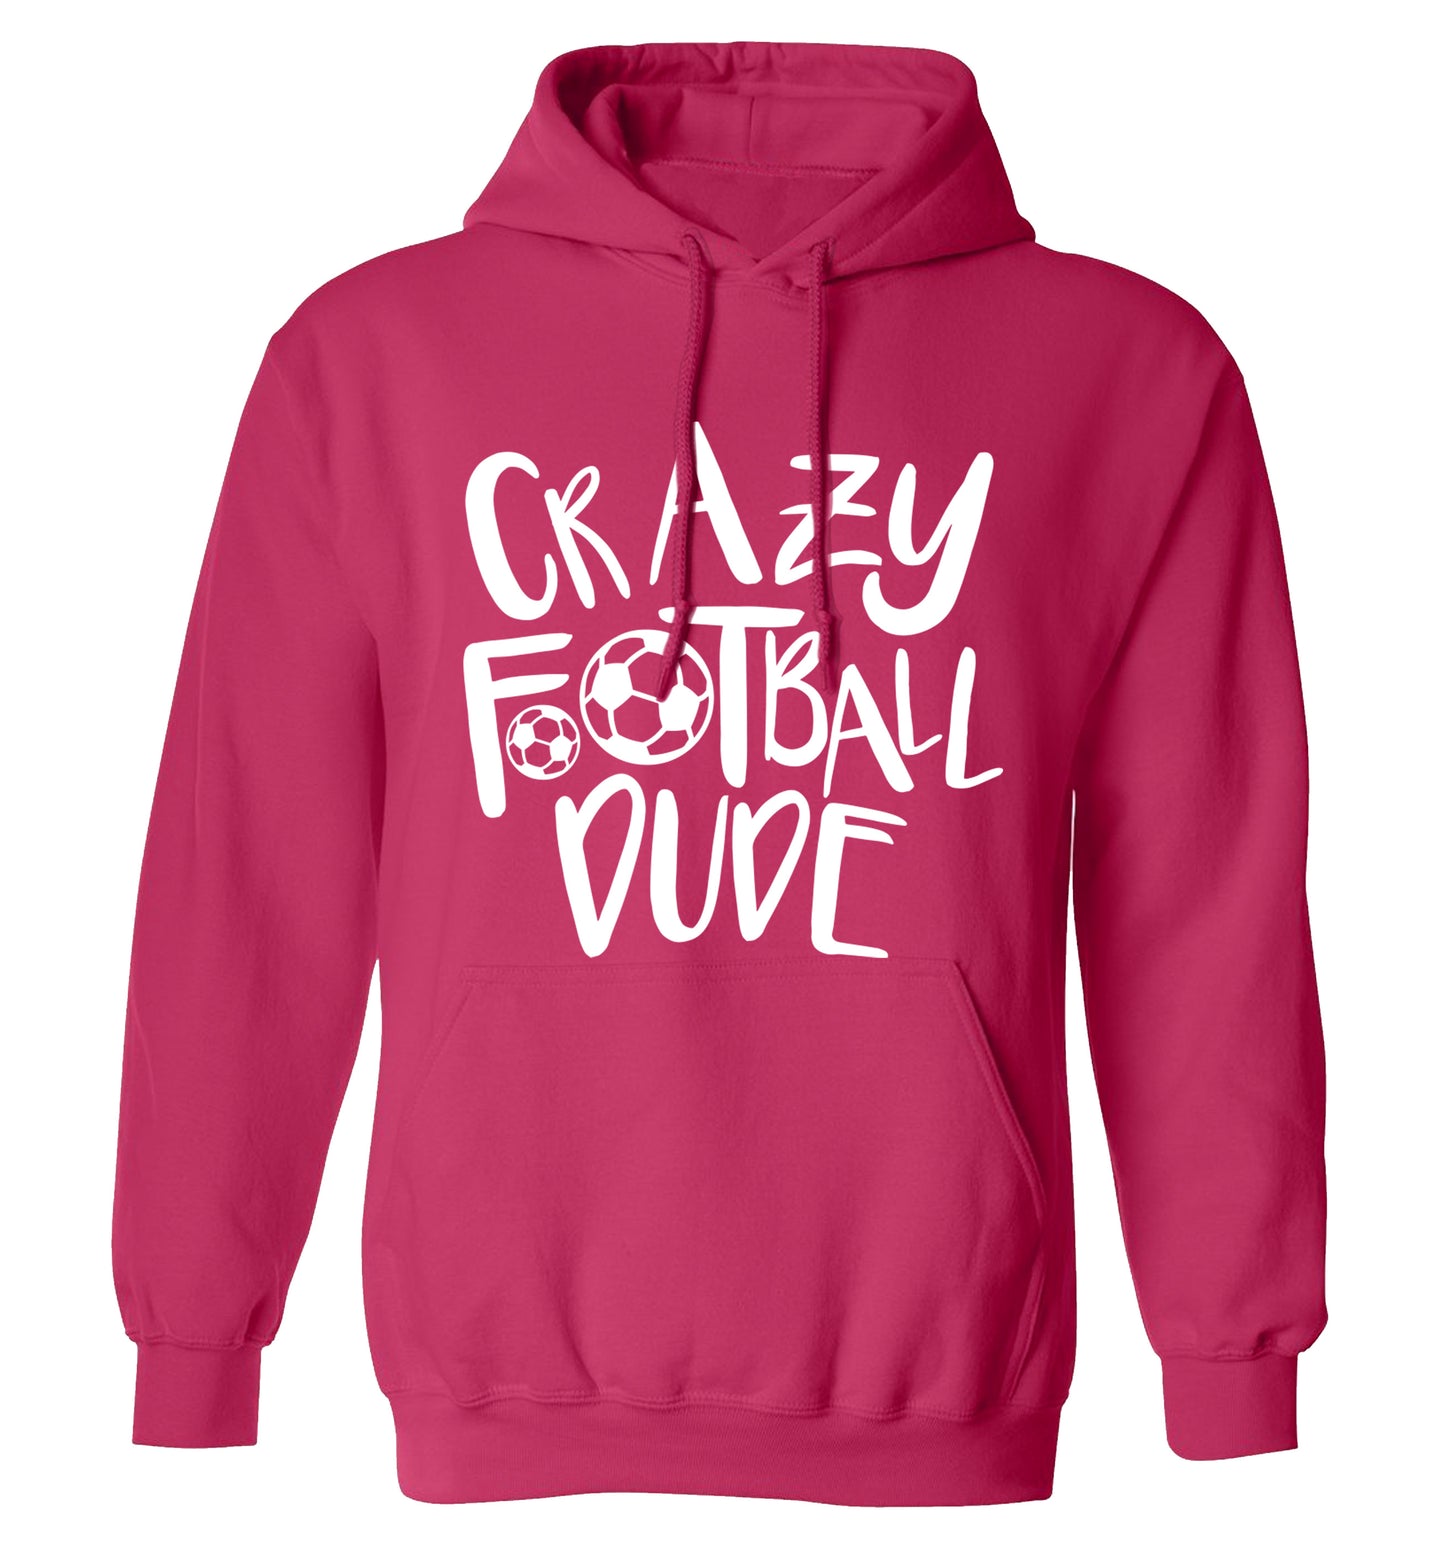 Crazy football dude adults unisexpink hoodie 2XL